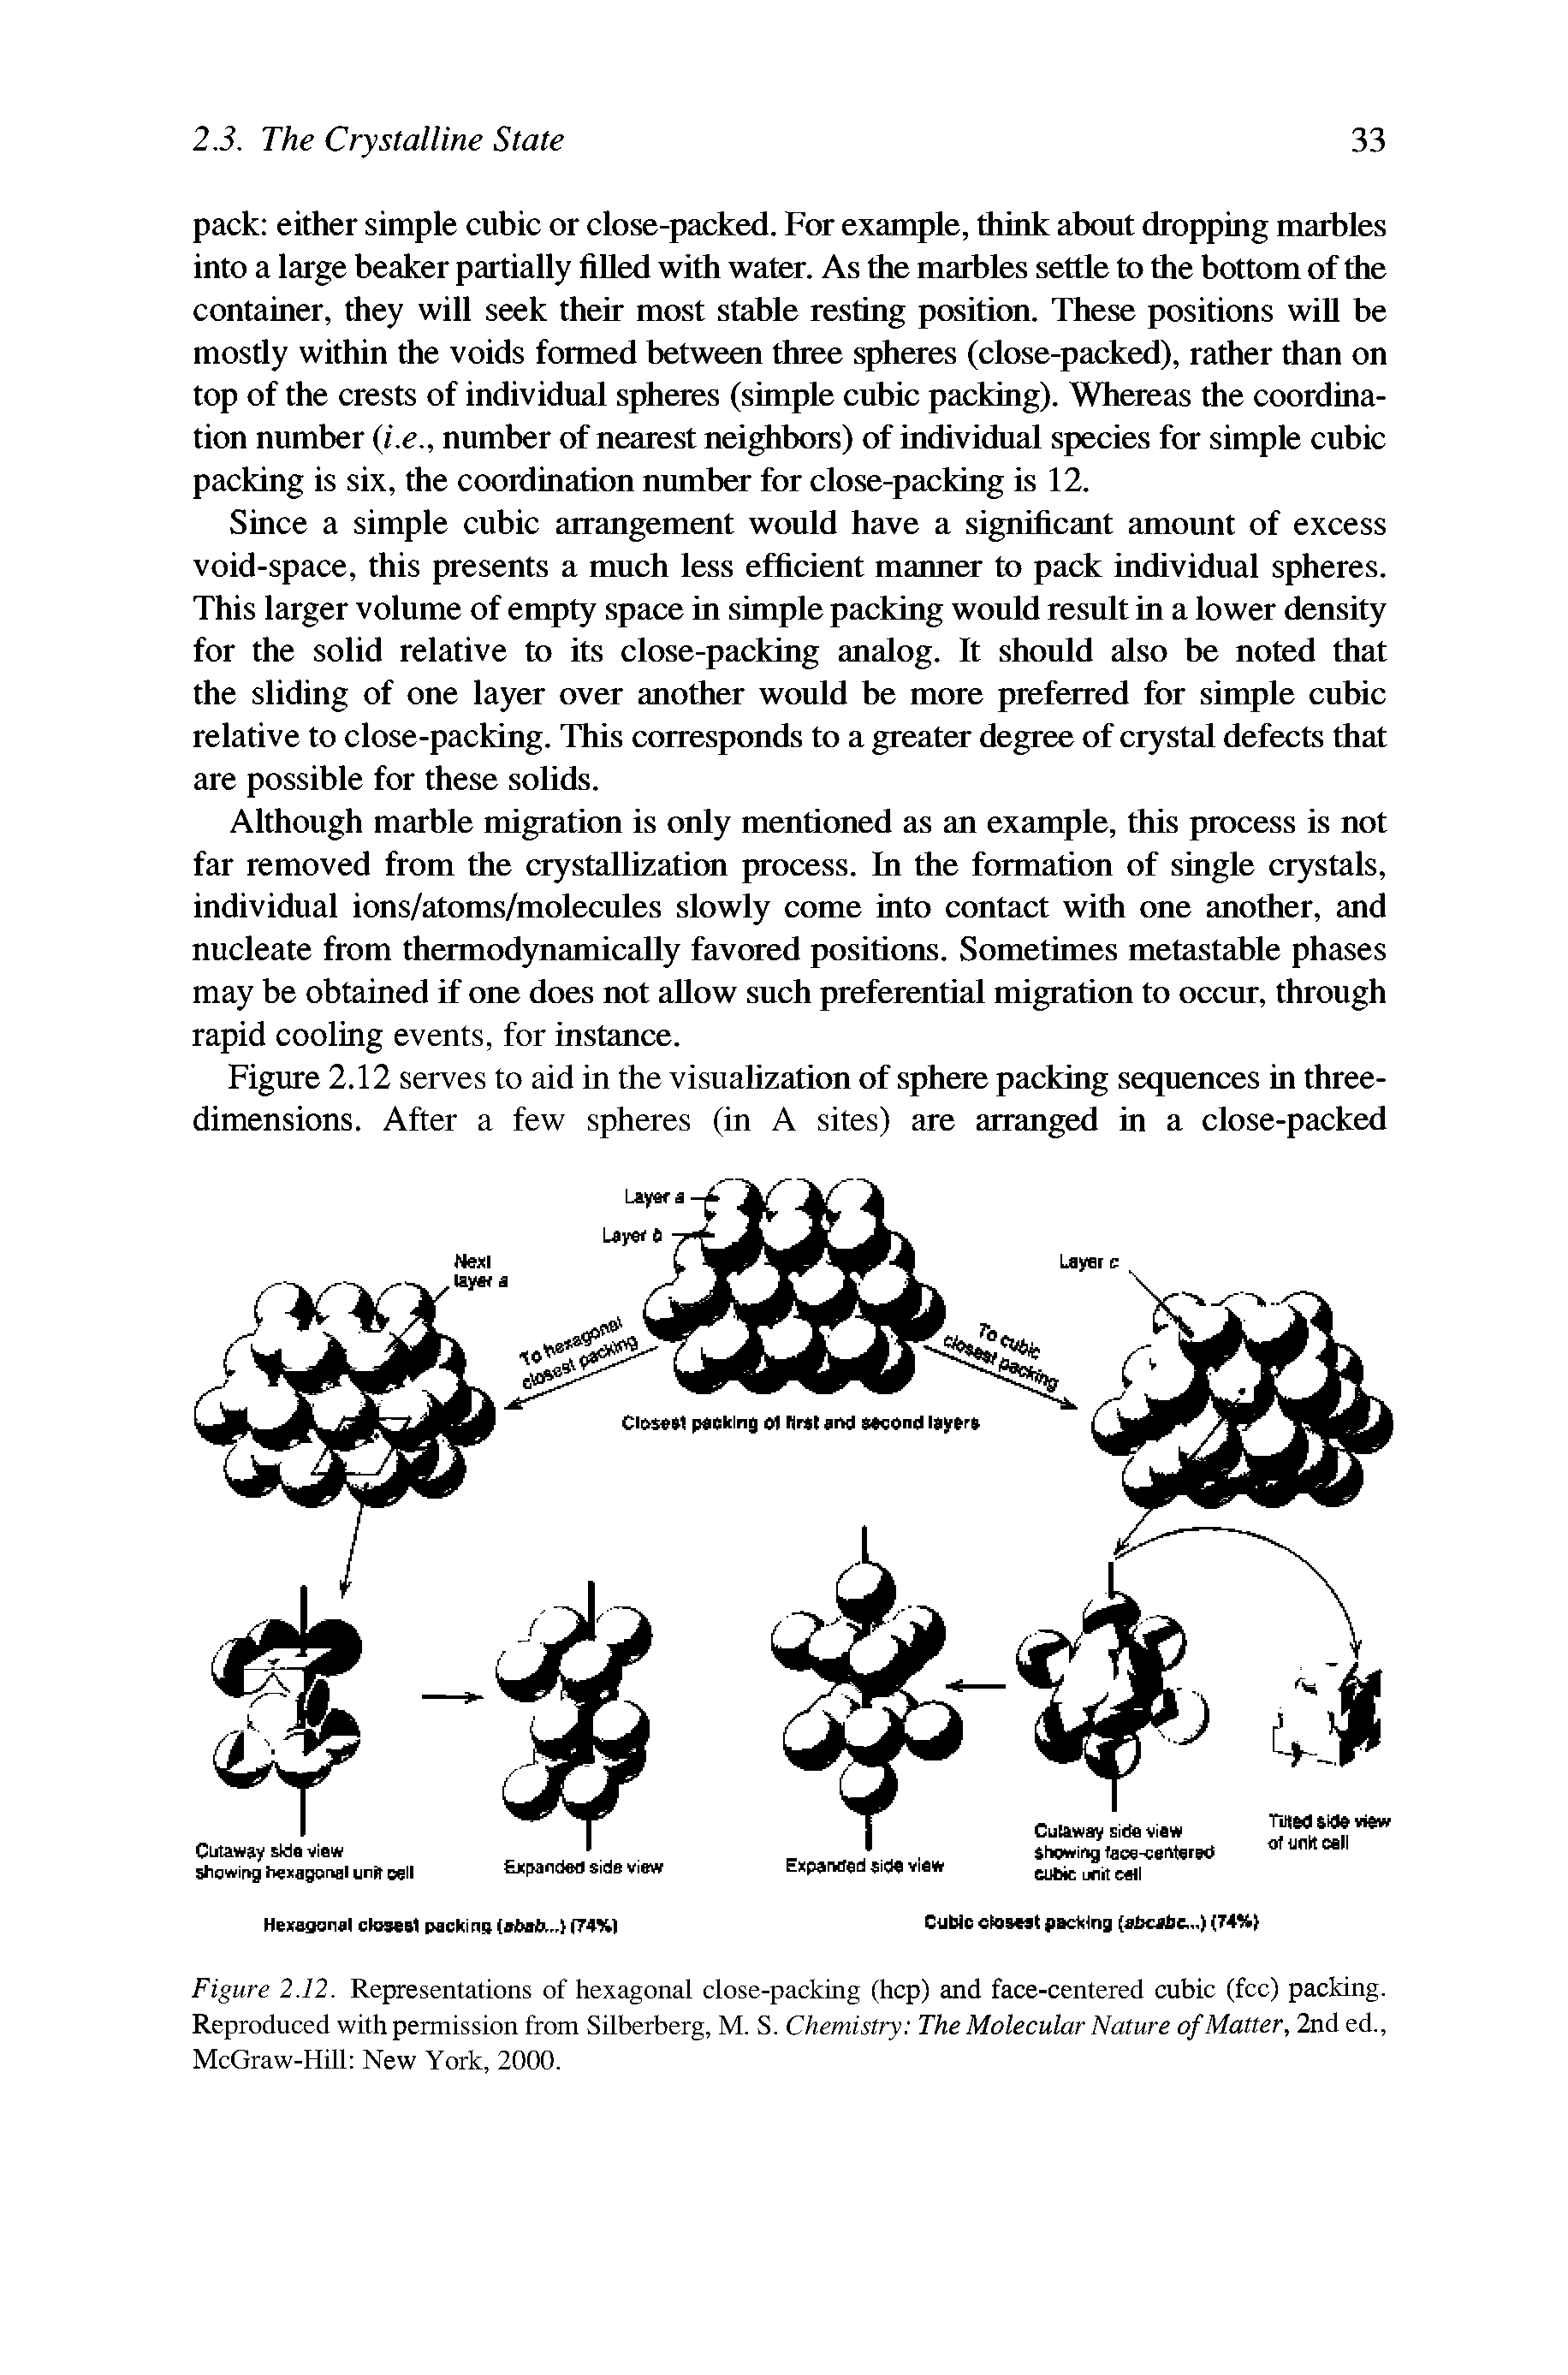 Figure 2.12. Representations of hexagonal close-packing (hep) and face-centered cubic (fee) packing. Reproduced with permission from Silberberg, M. S. Chemistry The Molecular Nature of Matter, 2nd ed., McGraw-Hill New York, 2000.